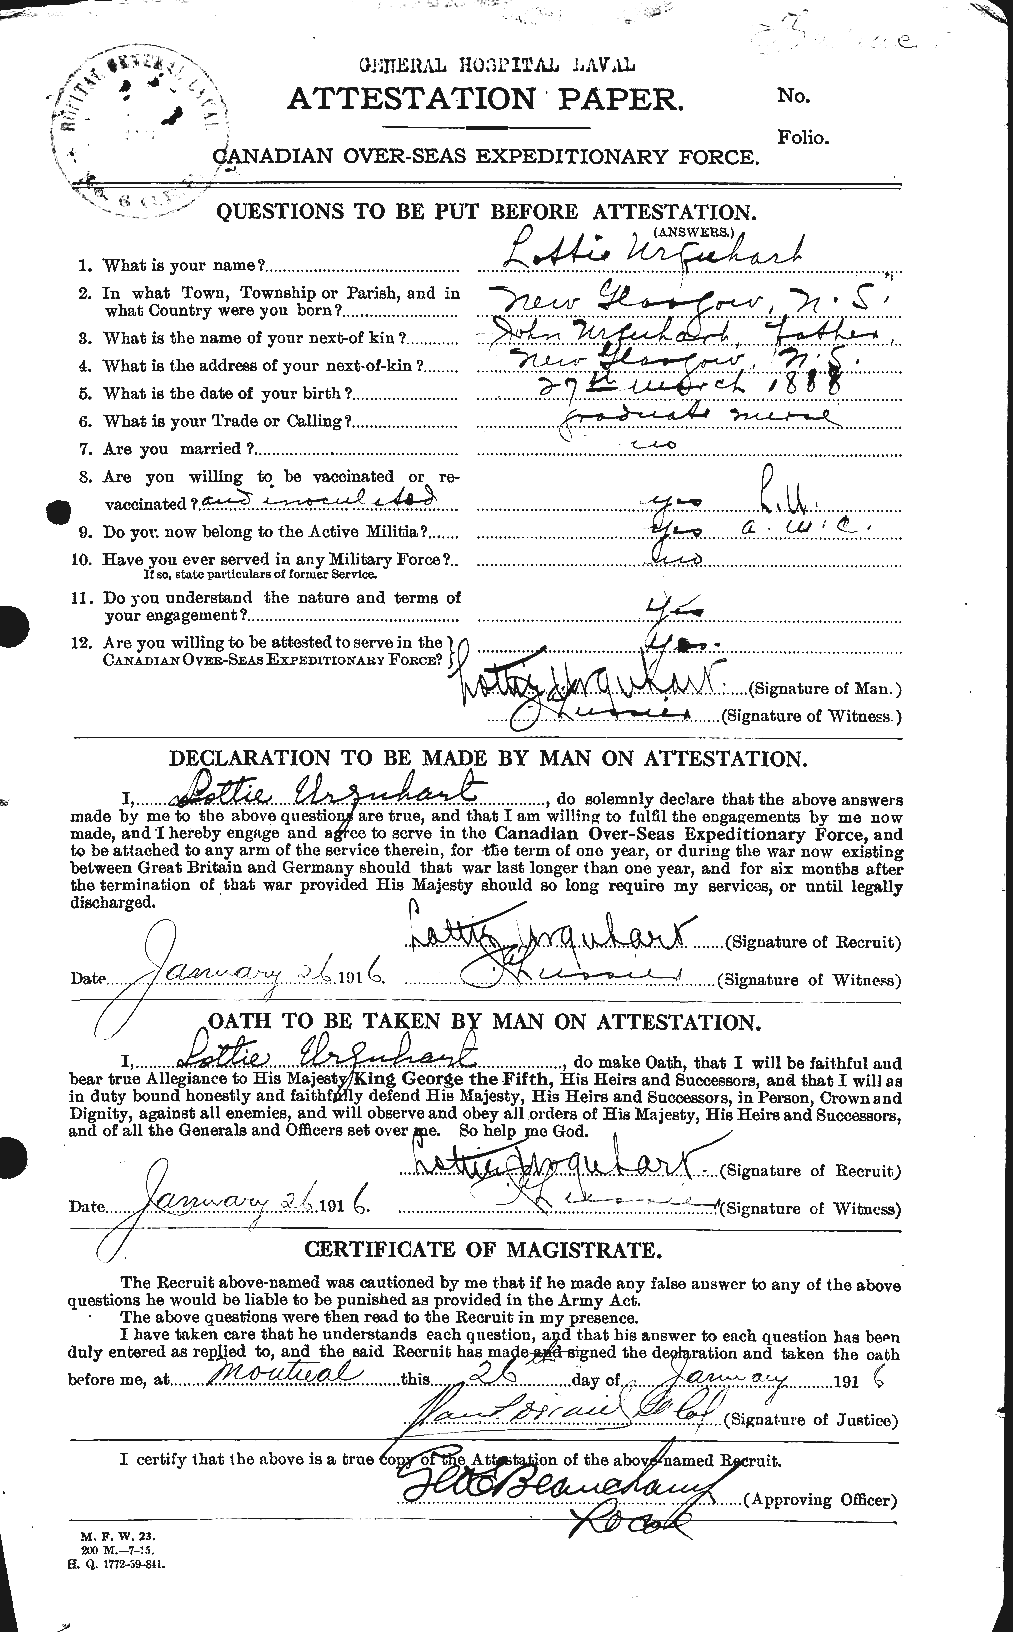 Personnel Records of the First World War - CEF 643392a